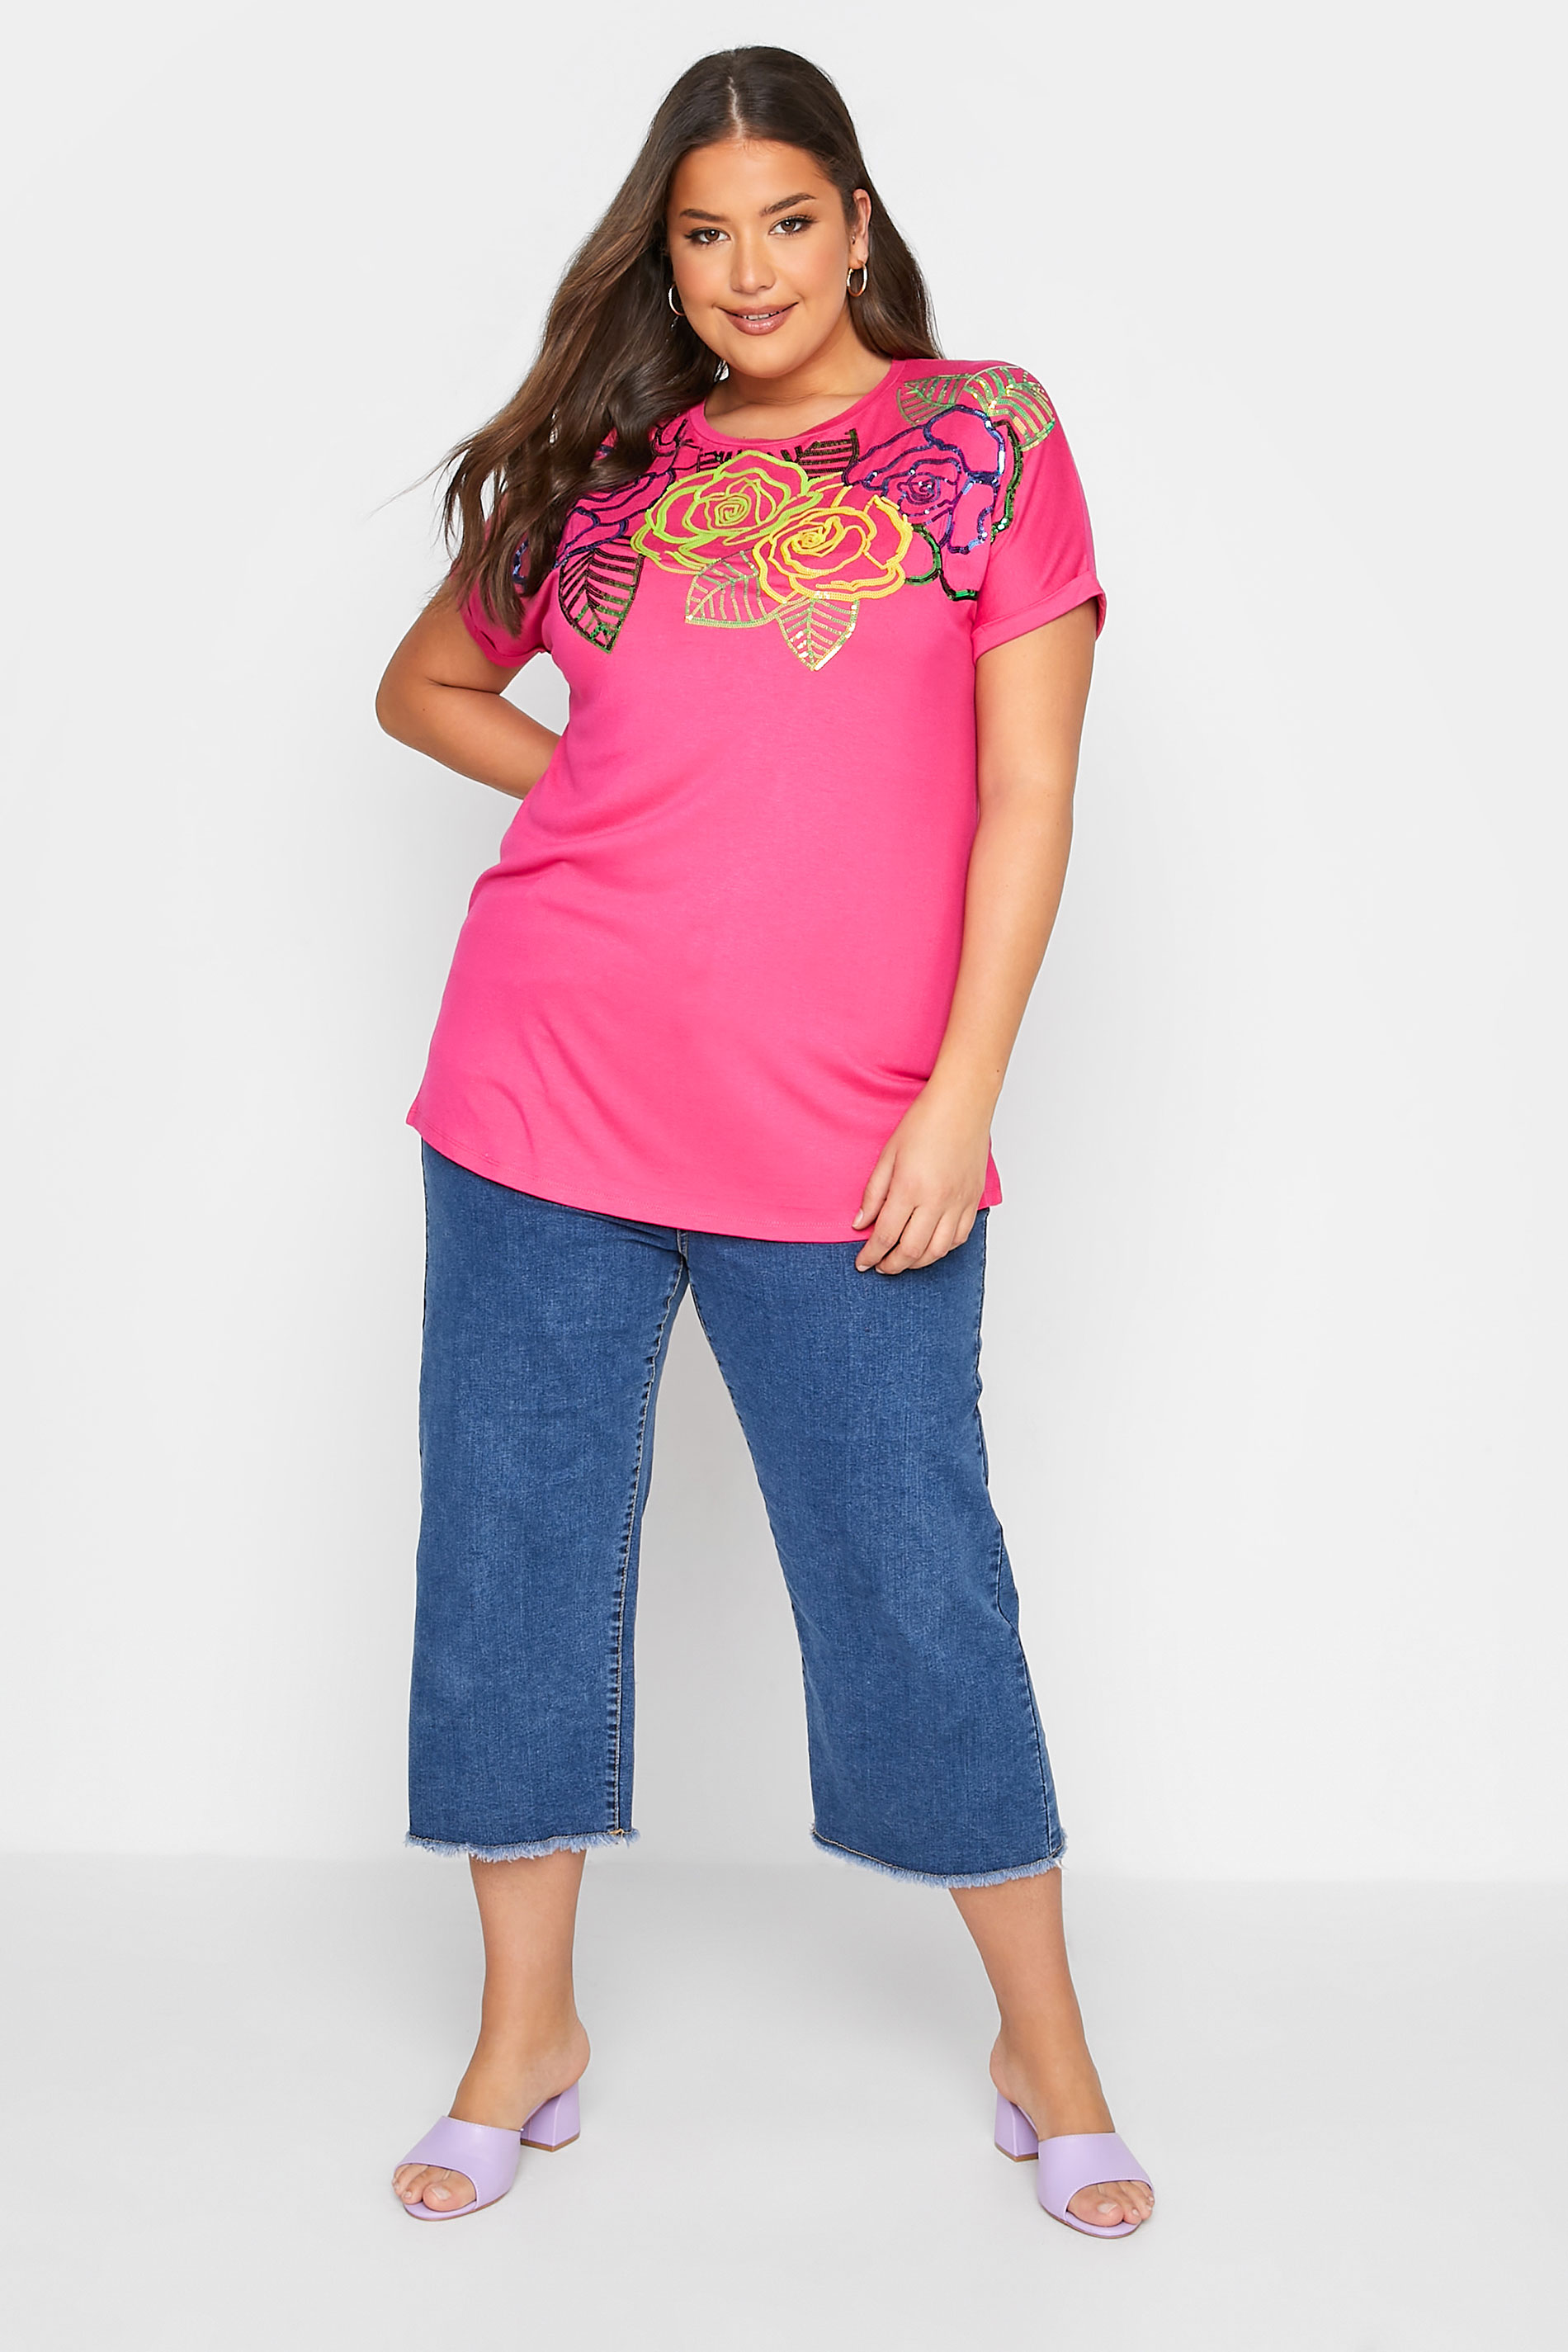 Grande taille  Tops Grande taille  Tops Jersey | T-Shirt Rose Empiècement Floral Sequins - GZ46974